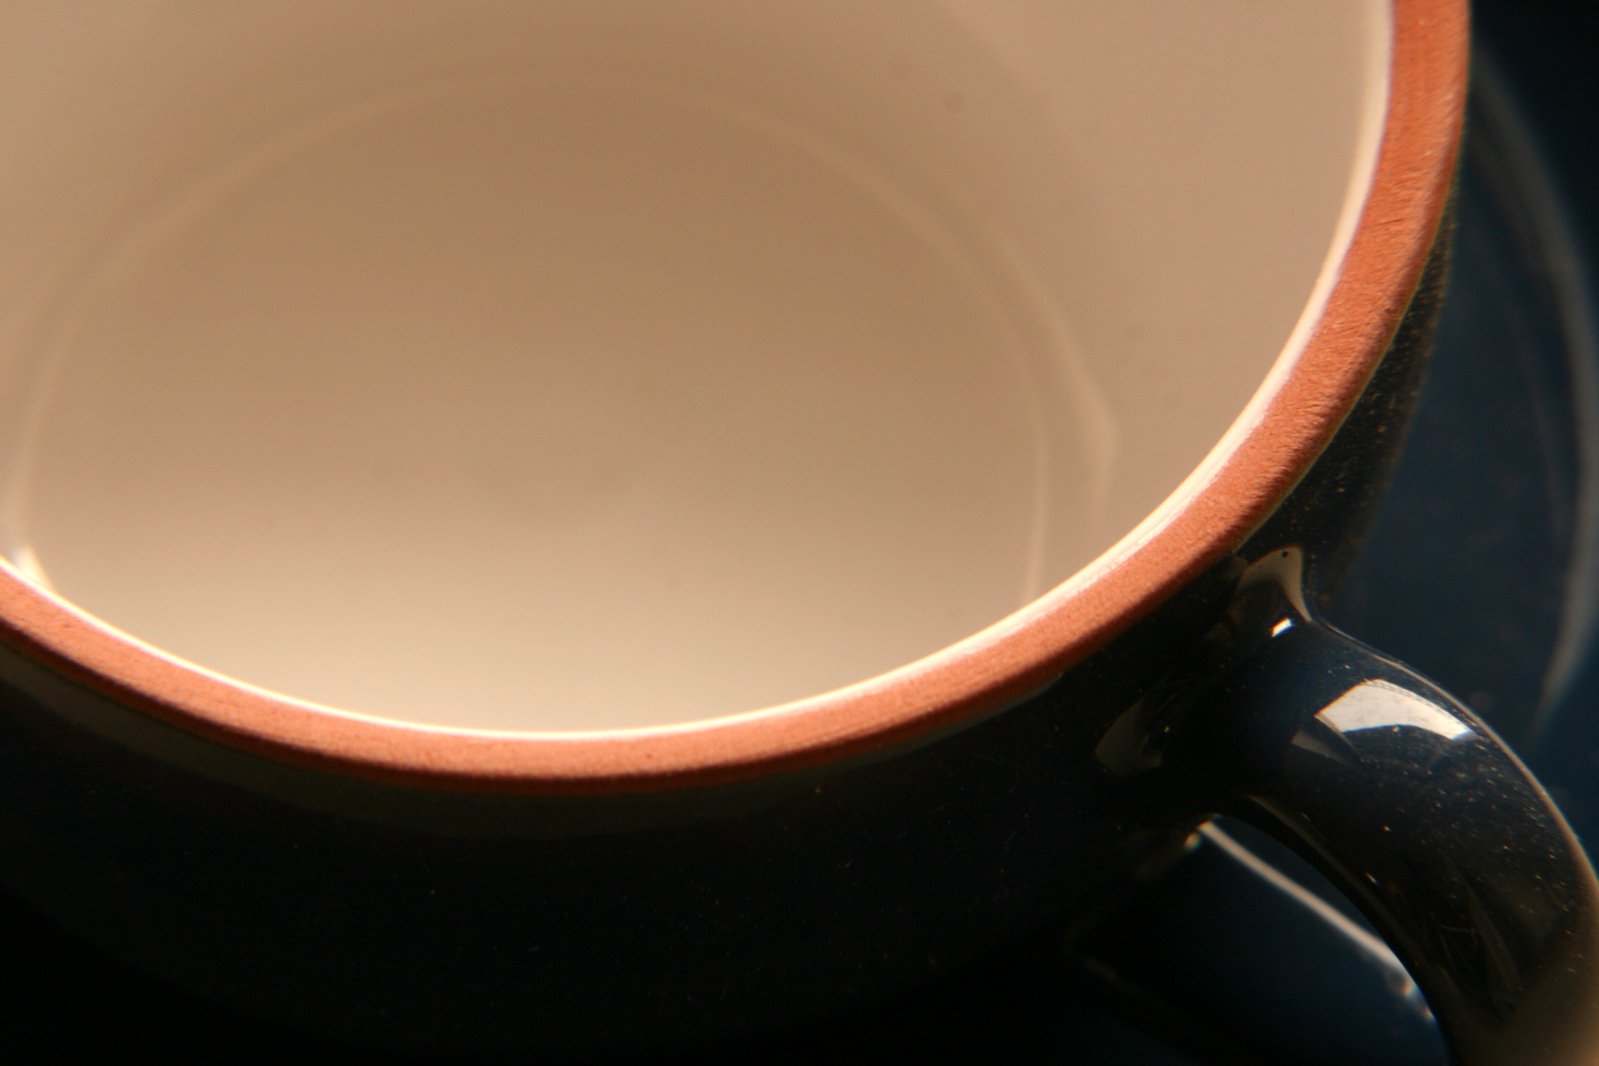 a black and orange coffee cup sitting on a blue tray